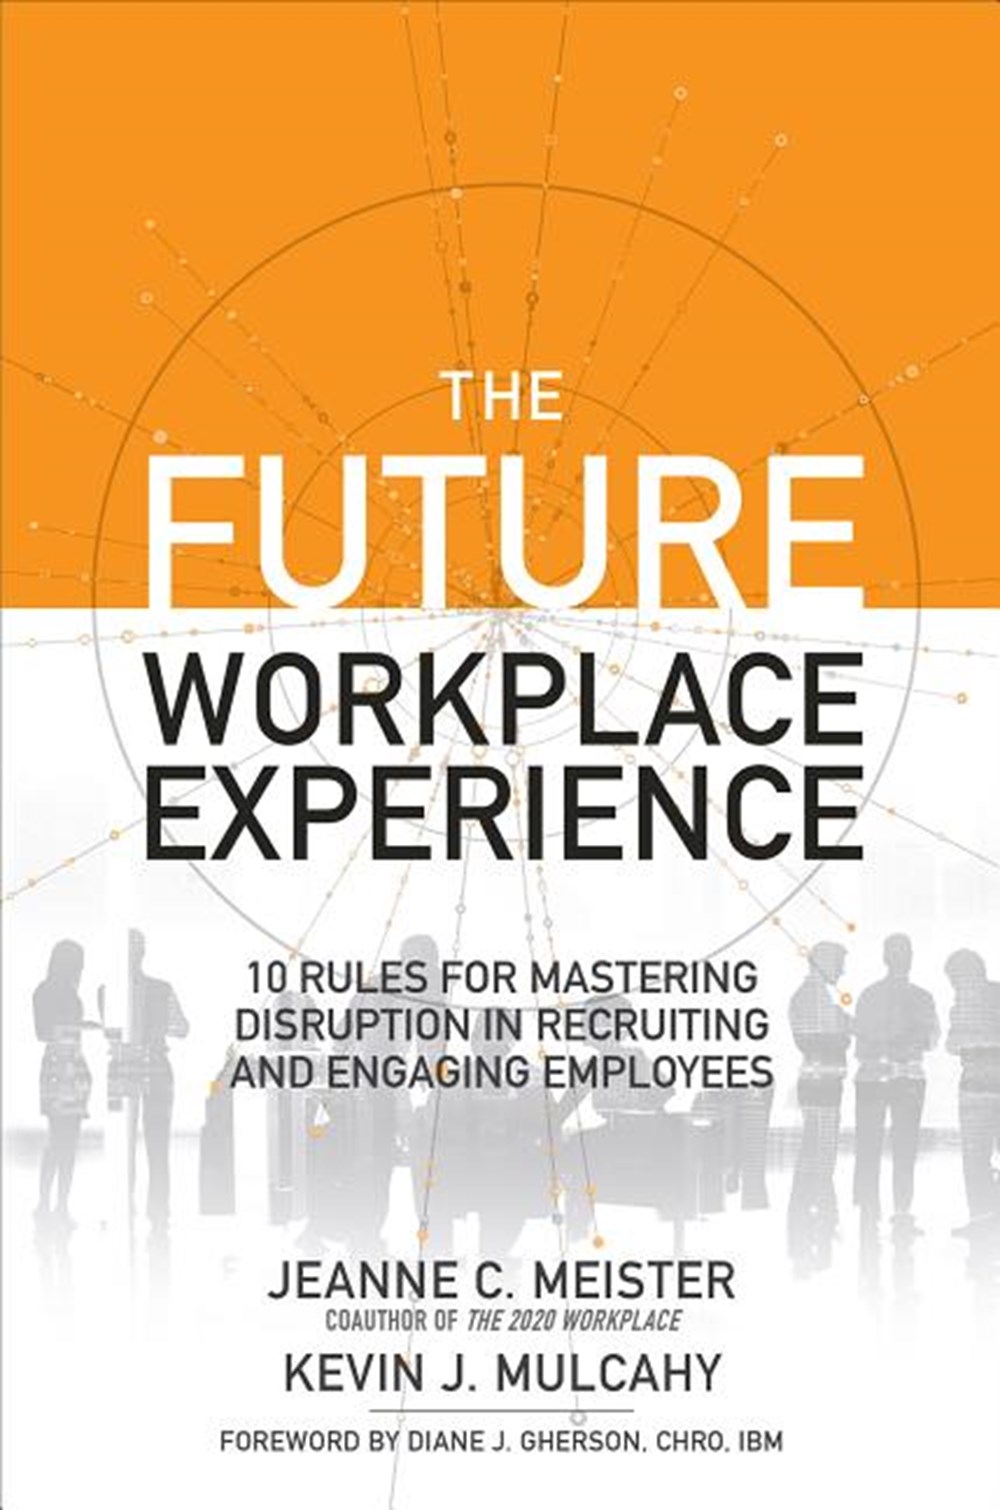 Future Workplace Experience: 10 Rules for Mastering Disruption in Recruiting and Engaging Employees